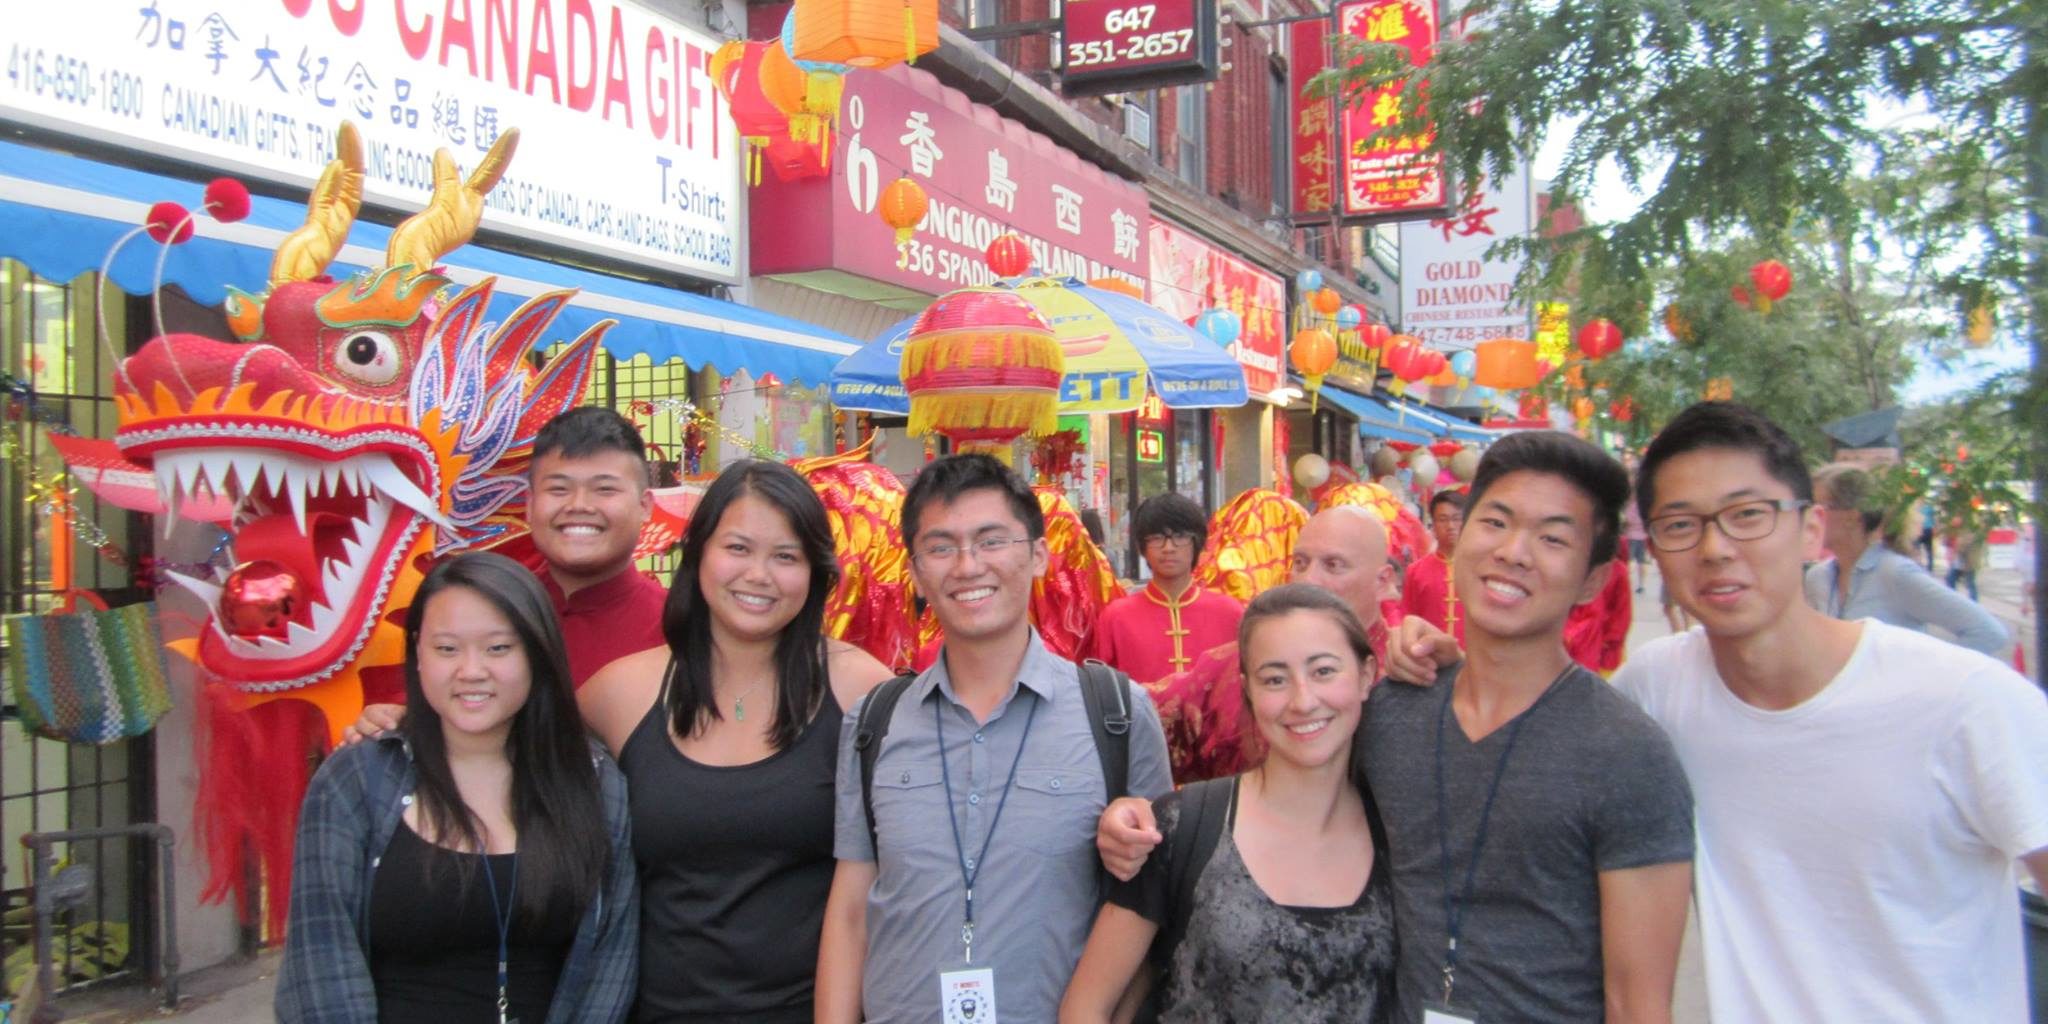 Get involved in this year's 2017 Toronto Chinatown Festival